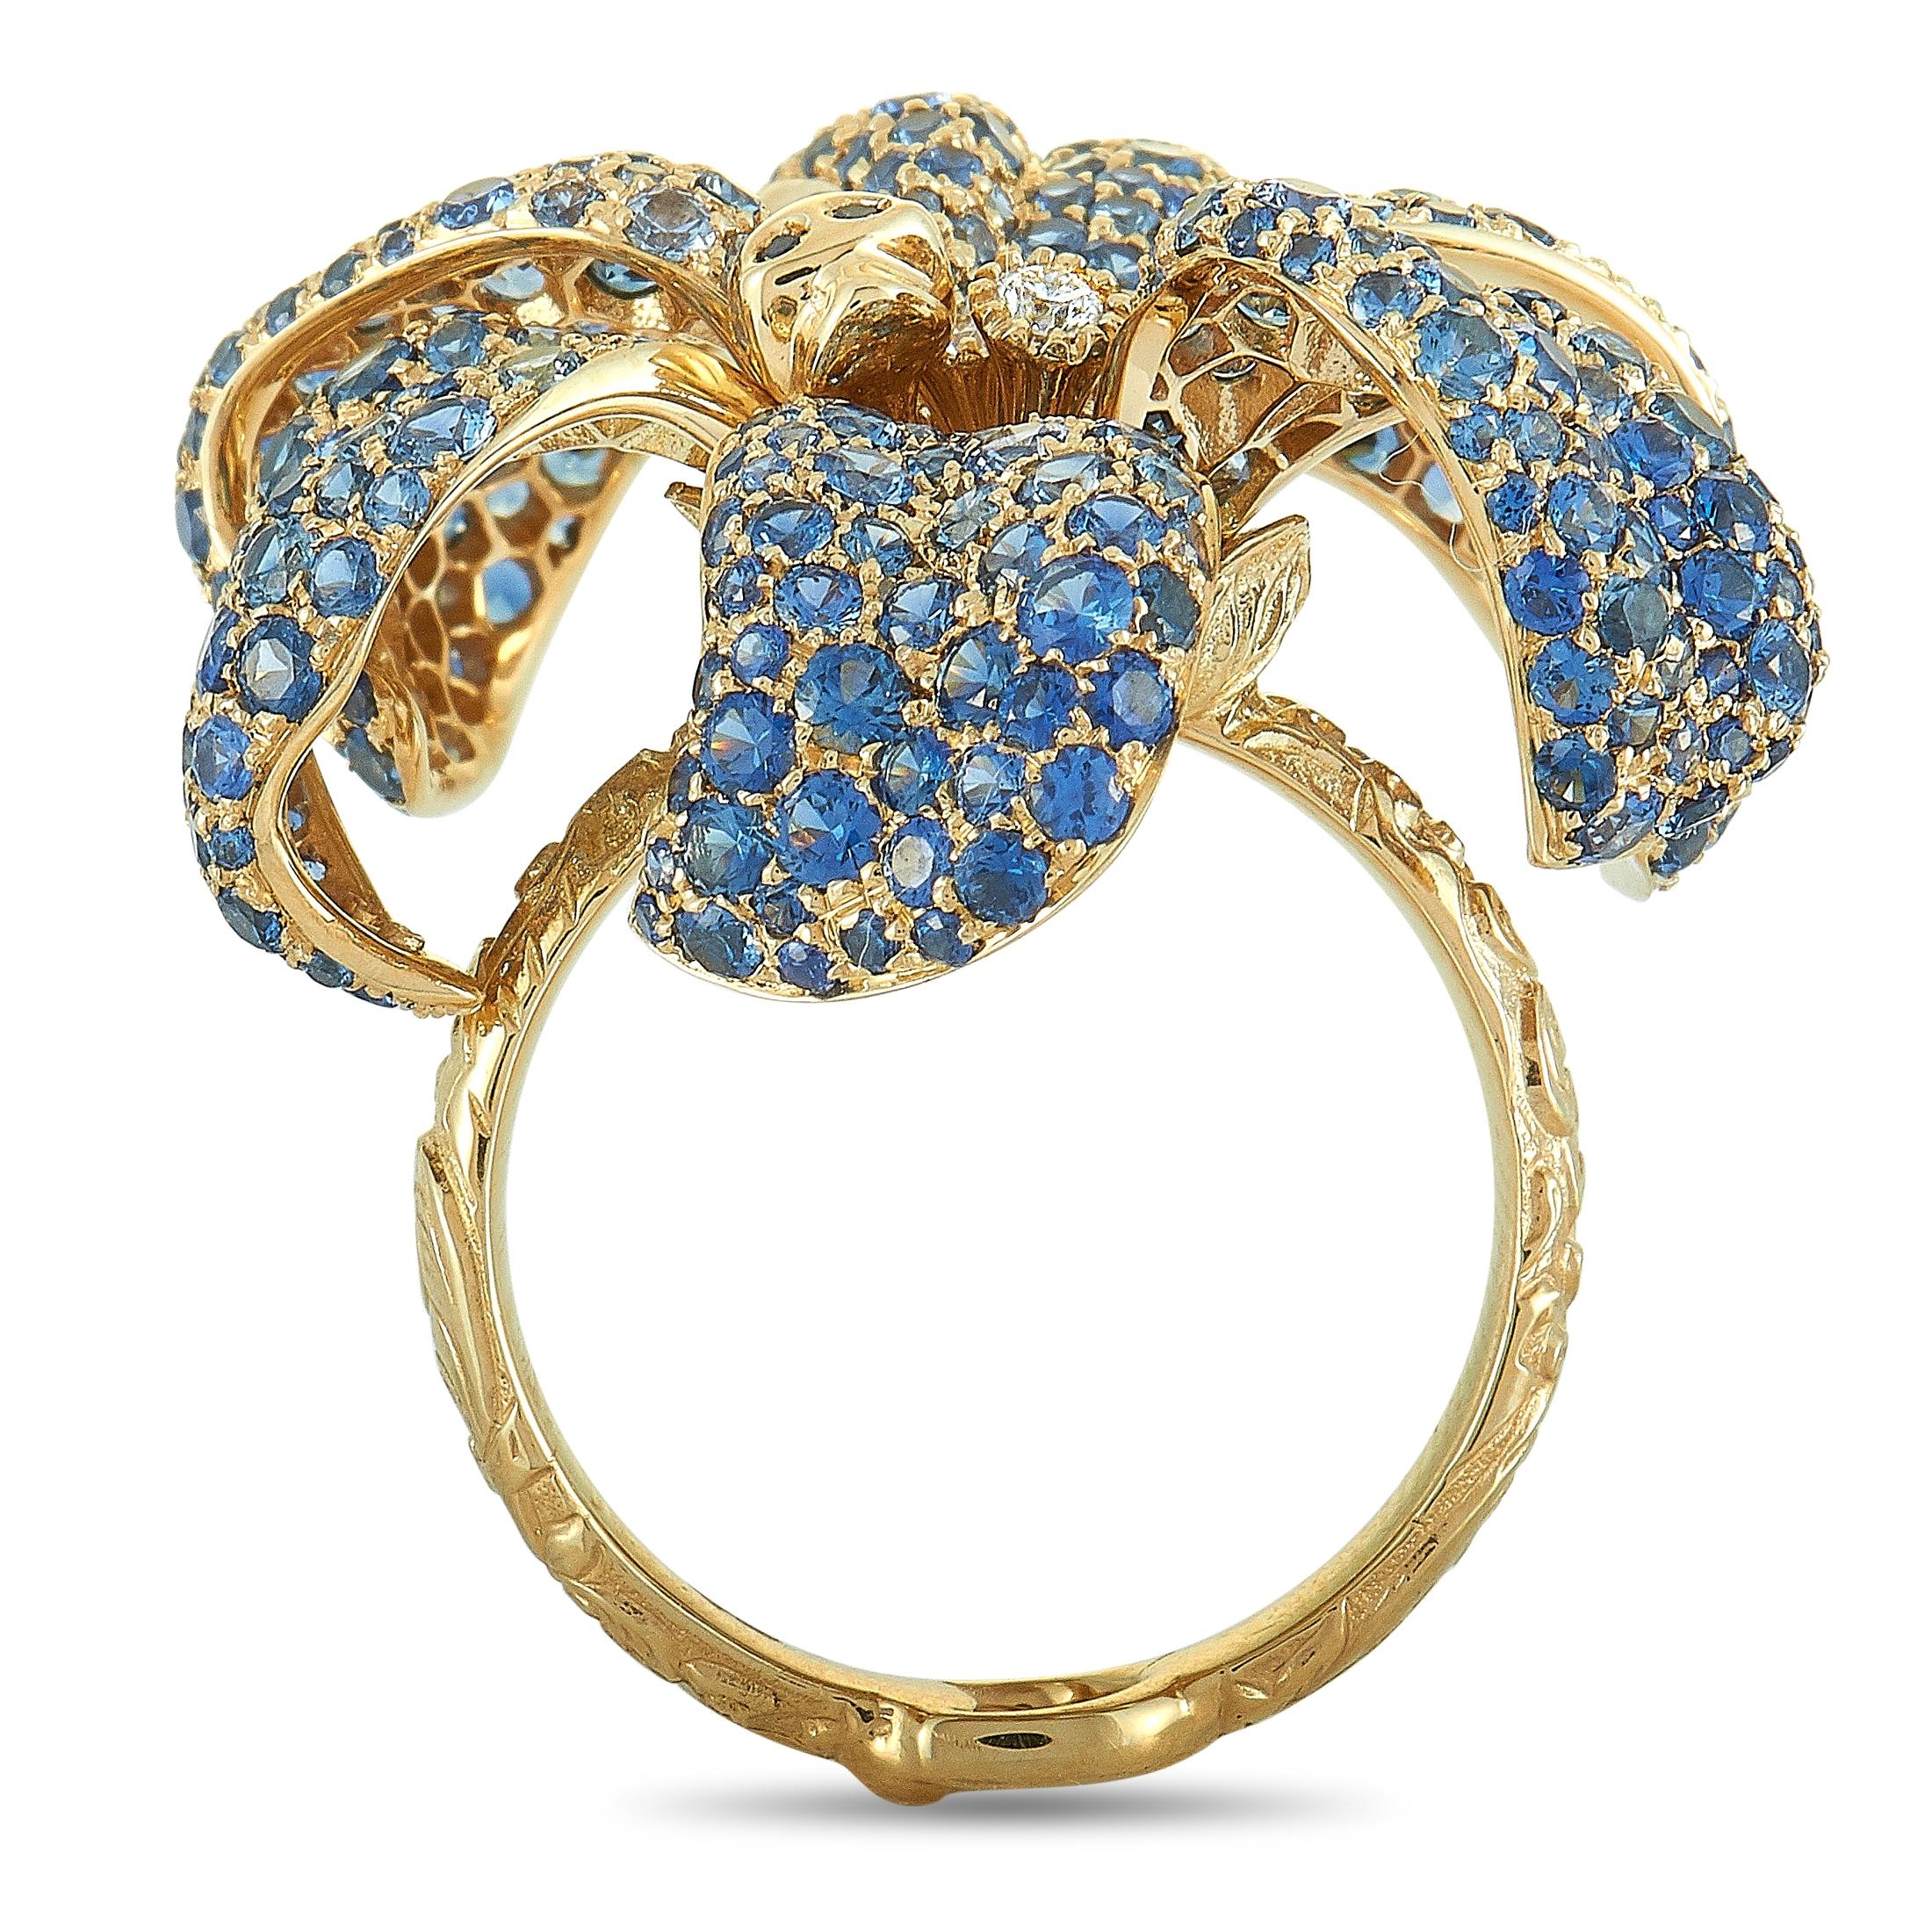 The “Flora” ring by Gucci is crafted from 18K yellow gold and set with a total of 7.29 carats of blue sapphires and 0.05 carats of diamonds. The ring weighs 15.7 grams, and boasts band thickness of 3 mm and top height of 10 mm, while top dimensions